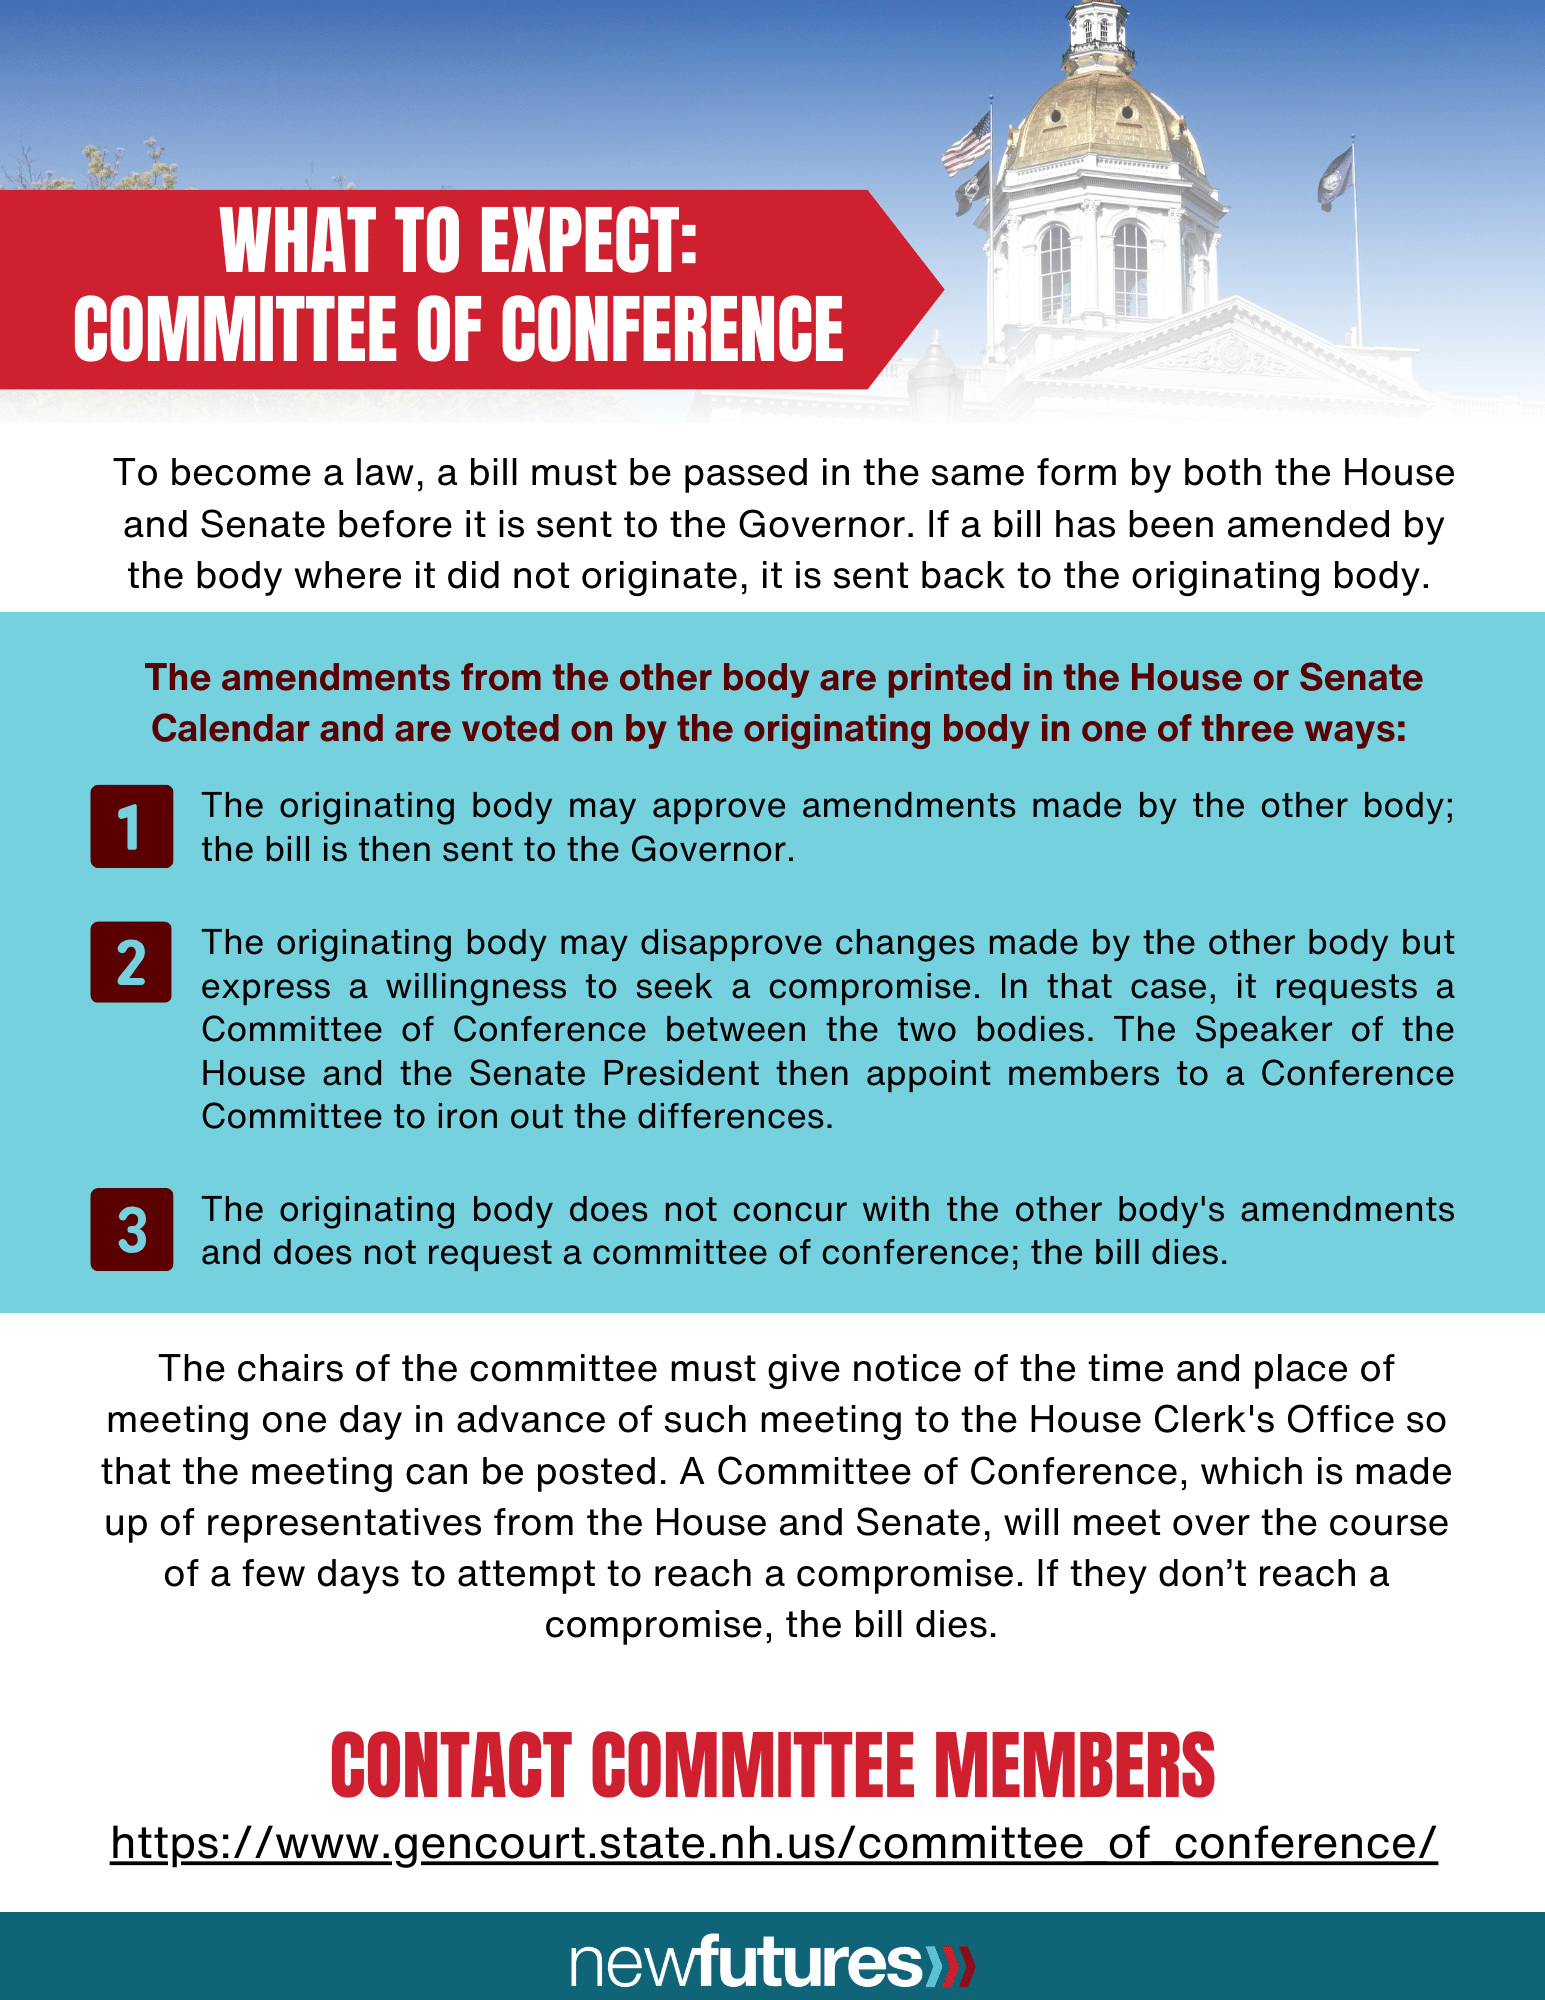 Committee_of_Conference_One-Pager.png